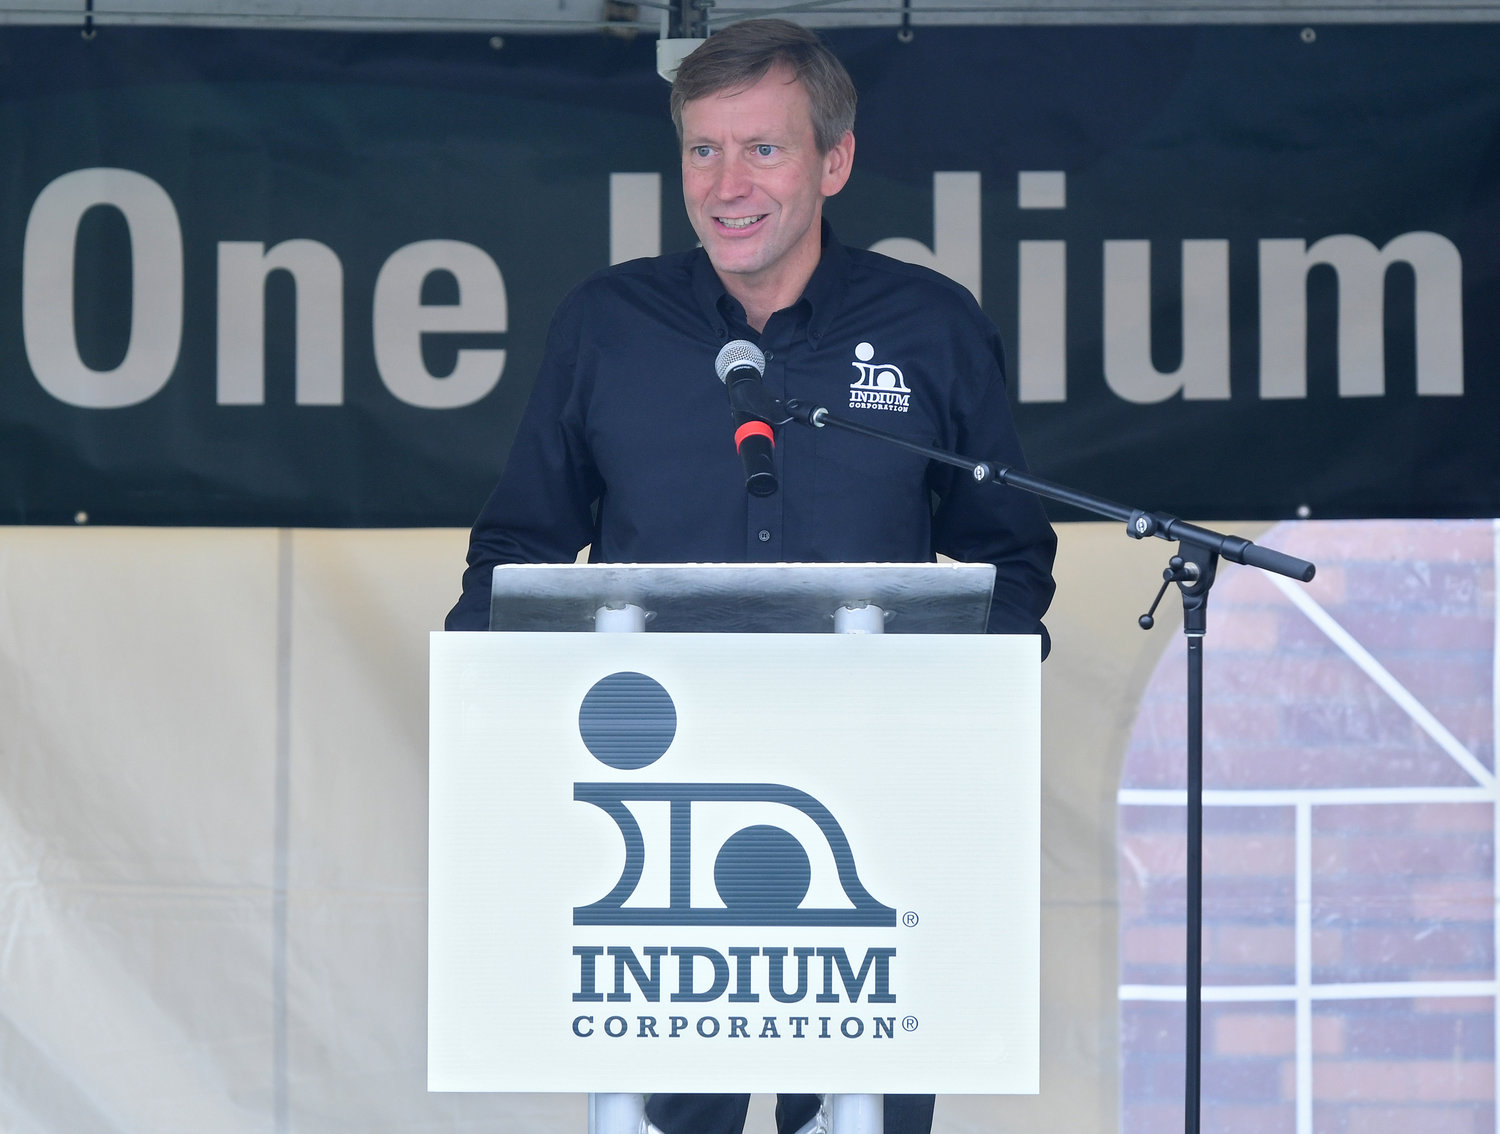 Ross B. Berntson, president and chief operating officer at Indium Corporation, speaks during a Wednesday press conference on Success Drive, Rome, about the recruiting event where they hope to hire 20 people.